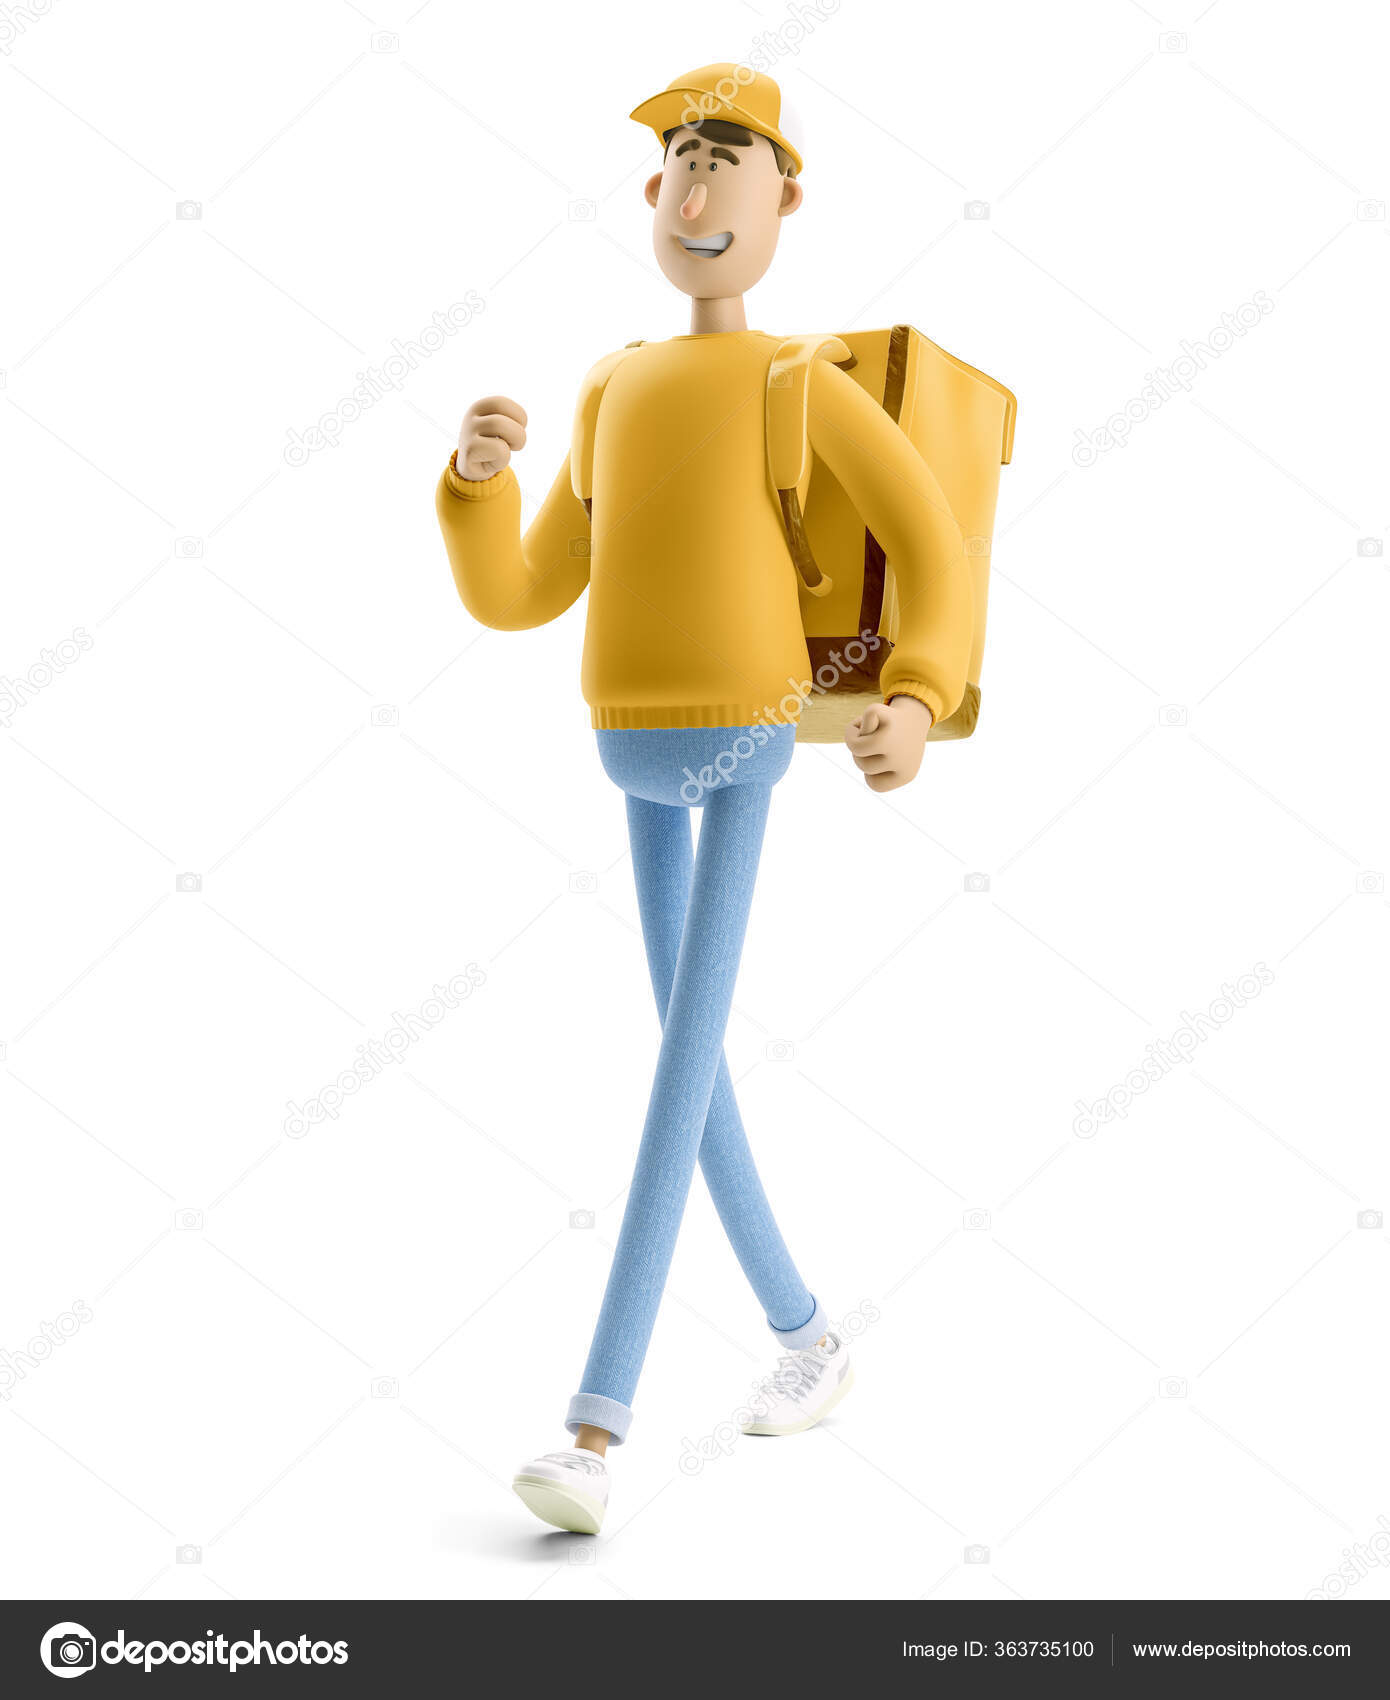 Express delivery concept. 3d illustration. Cartoon character. Delivery  underway guy is running to take a rush order in yellow uniform stands with  the big bag. Stock Photo by ©bestpixels 363735100